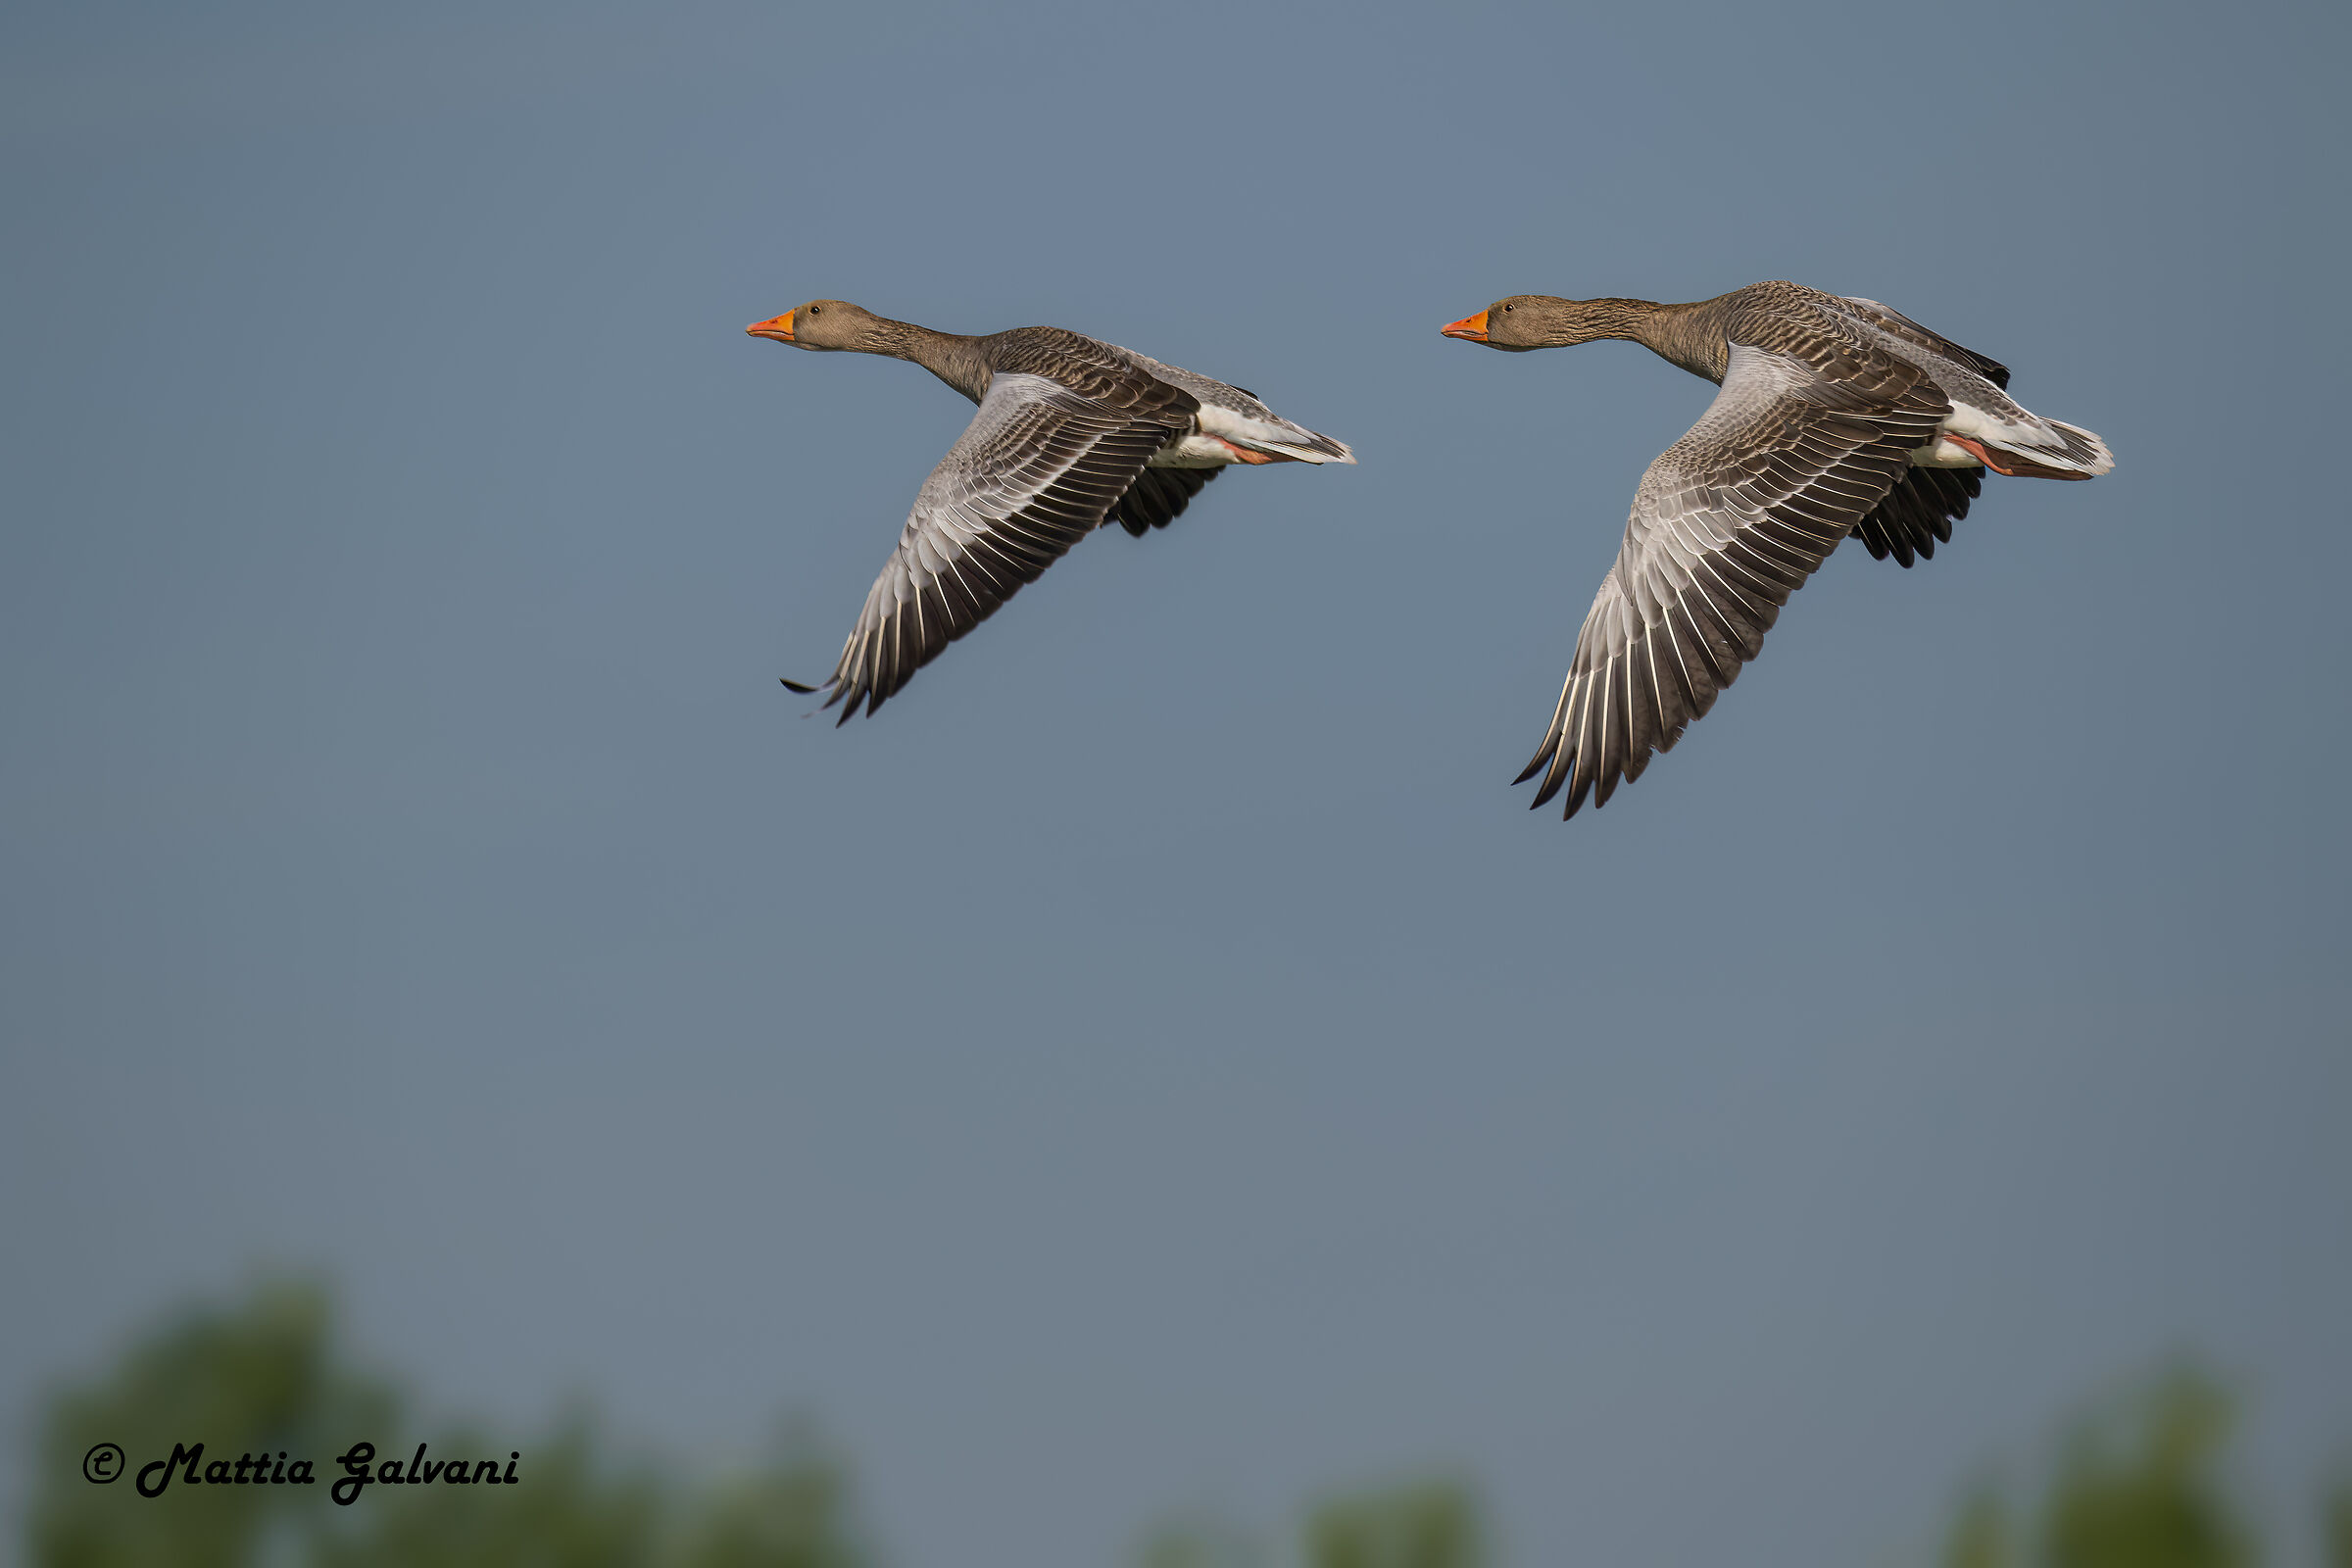 The synchronous flight of the Wild Geese...